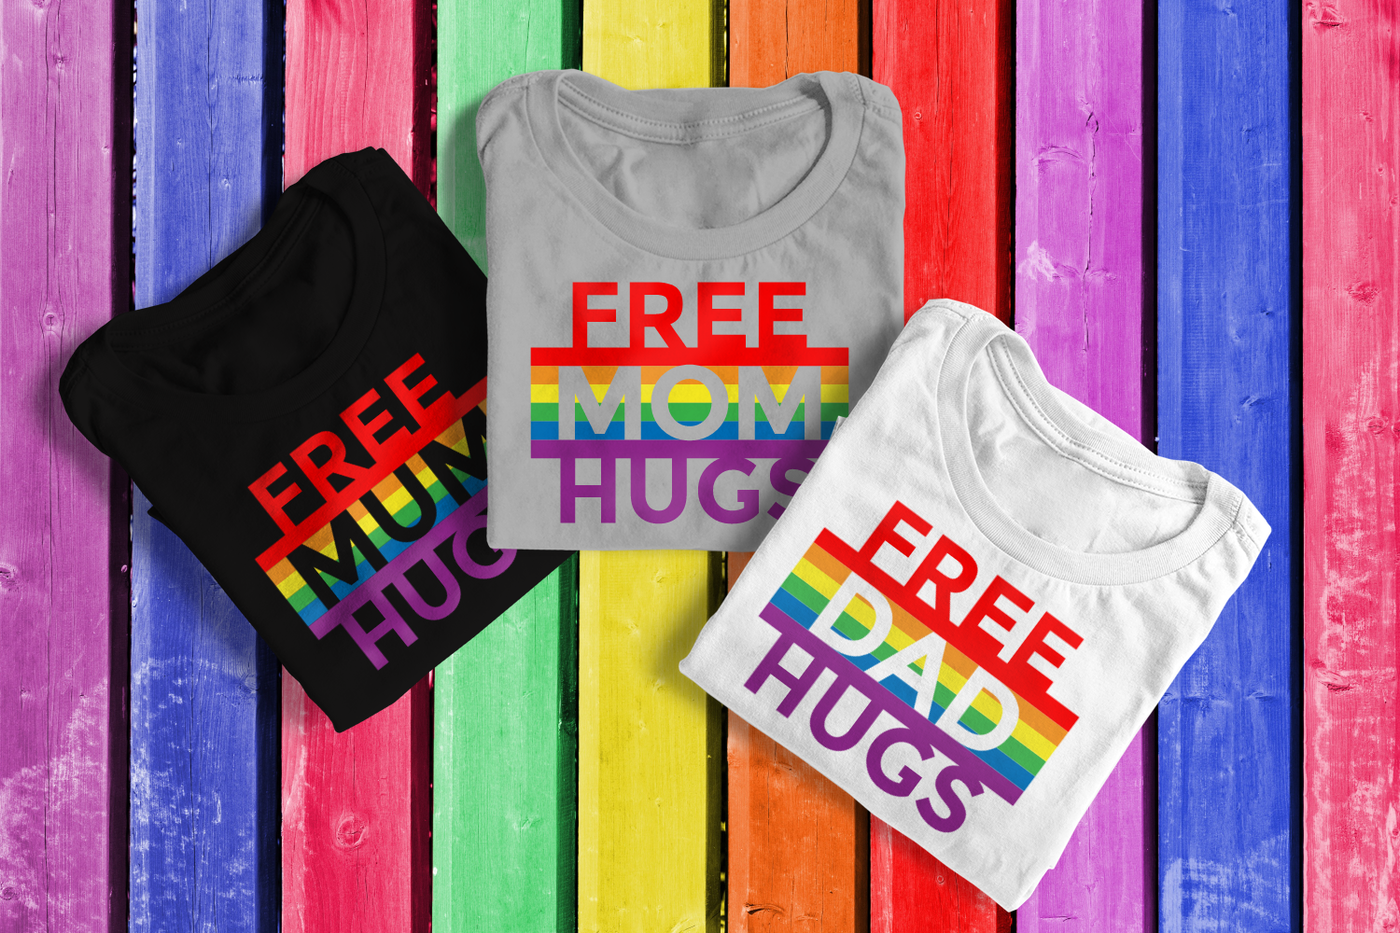 Three folded tees. Each has rainbow stripes and the phrase "free hugs." Mum, Mom, and Dad are knocked out of each of the rainbow areas.